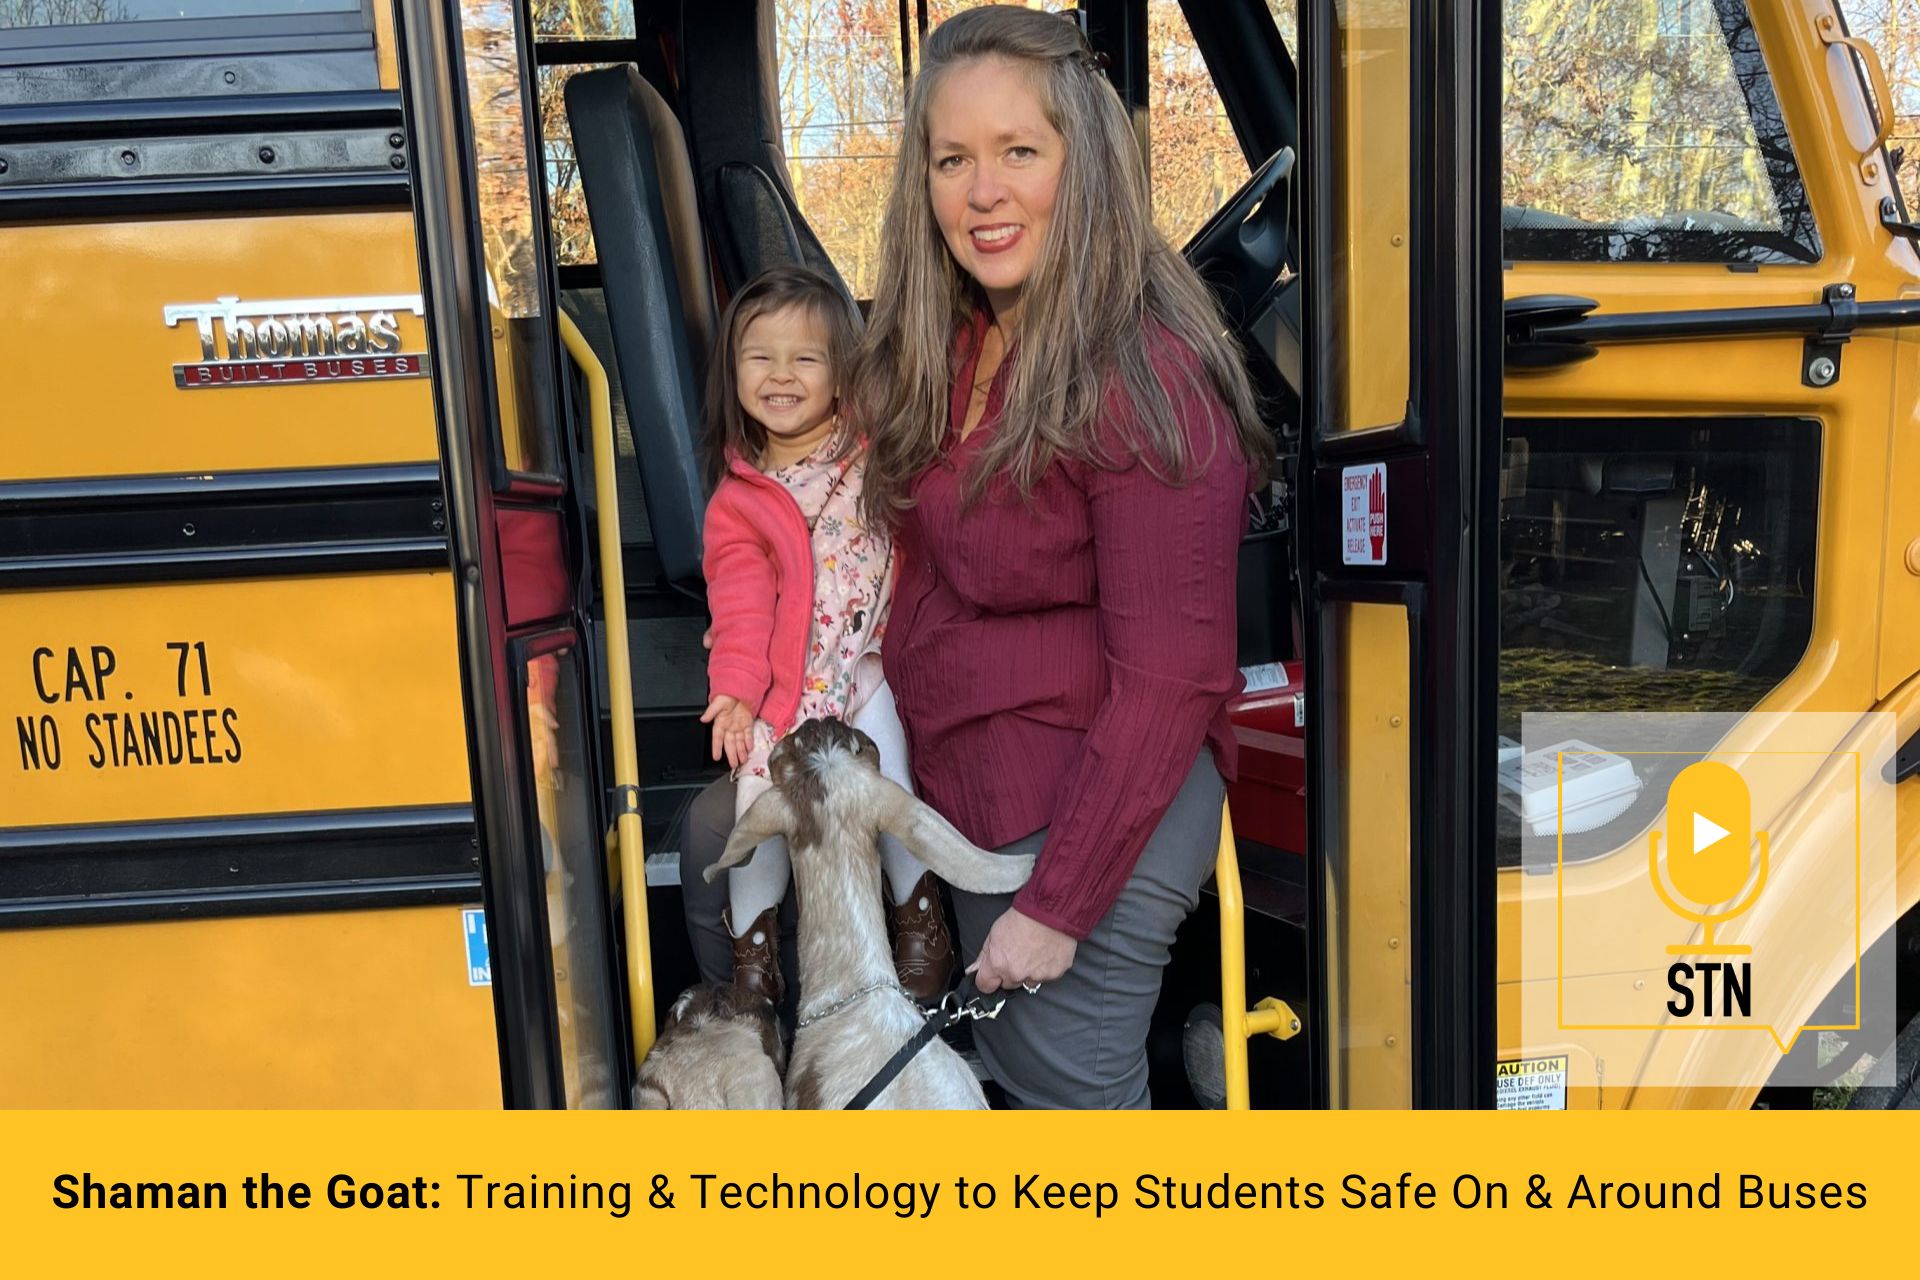 Keeping Students Safe on and around Buses: Shaman the Goat’s Training and Technology (STN Podcast E207)